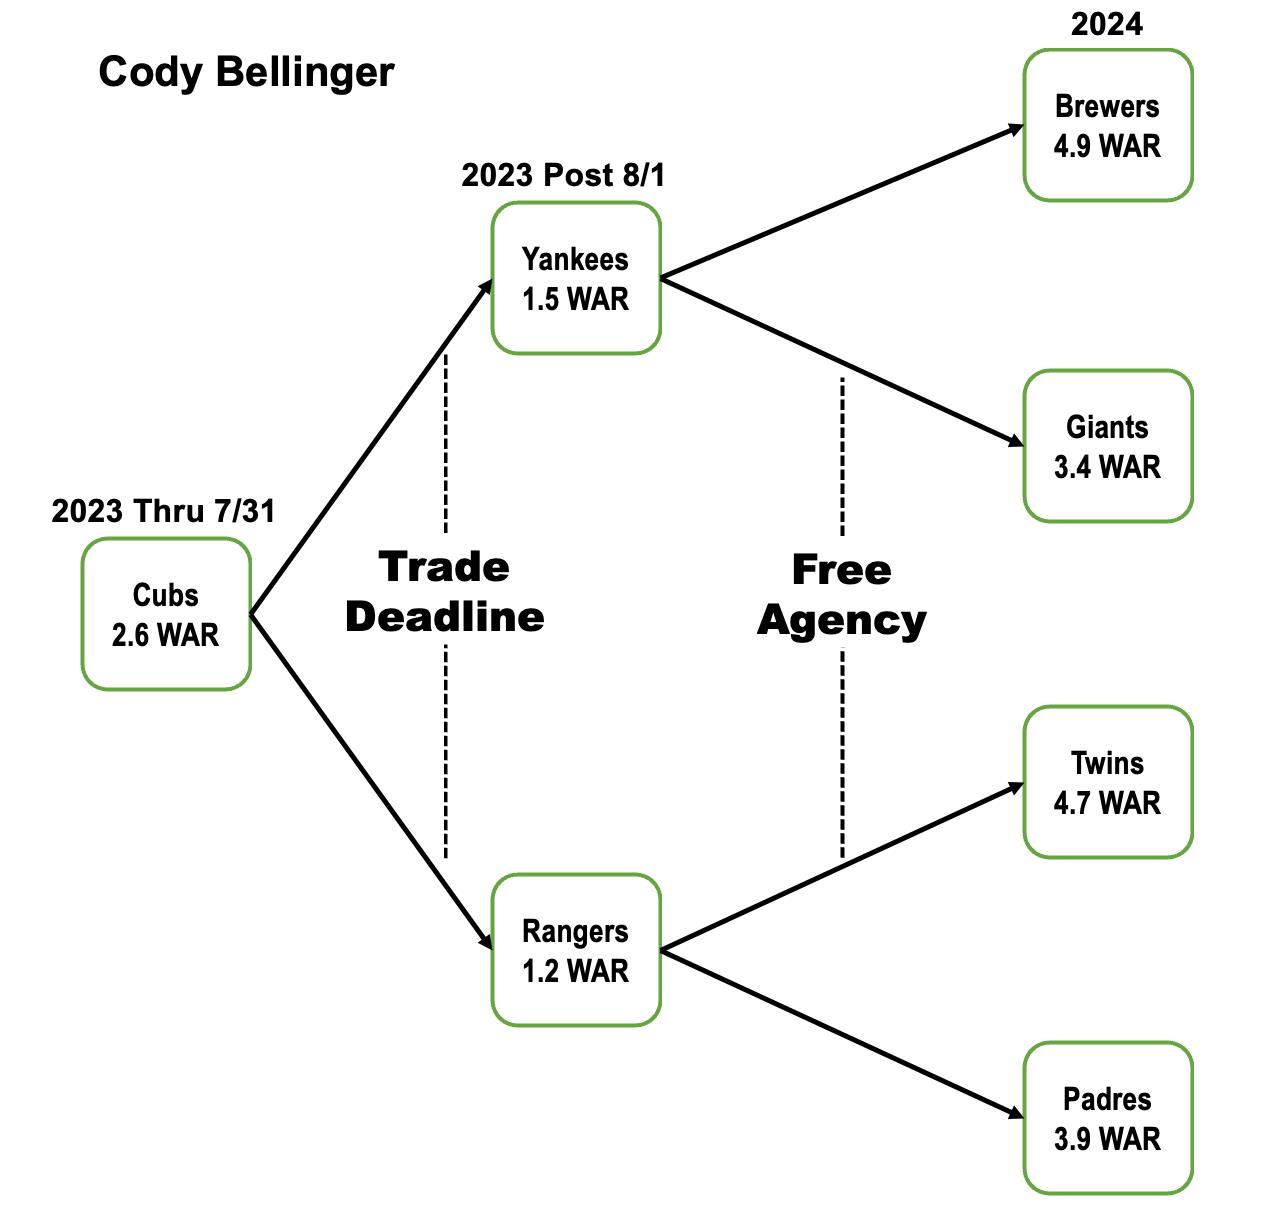 Flow chart showing performance outcomes for Cody Bellinger based on which team he plays for